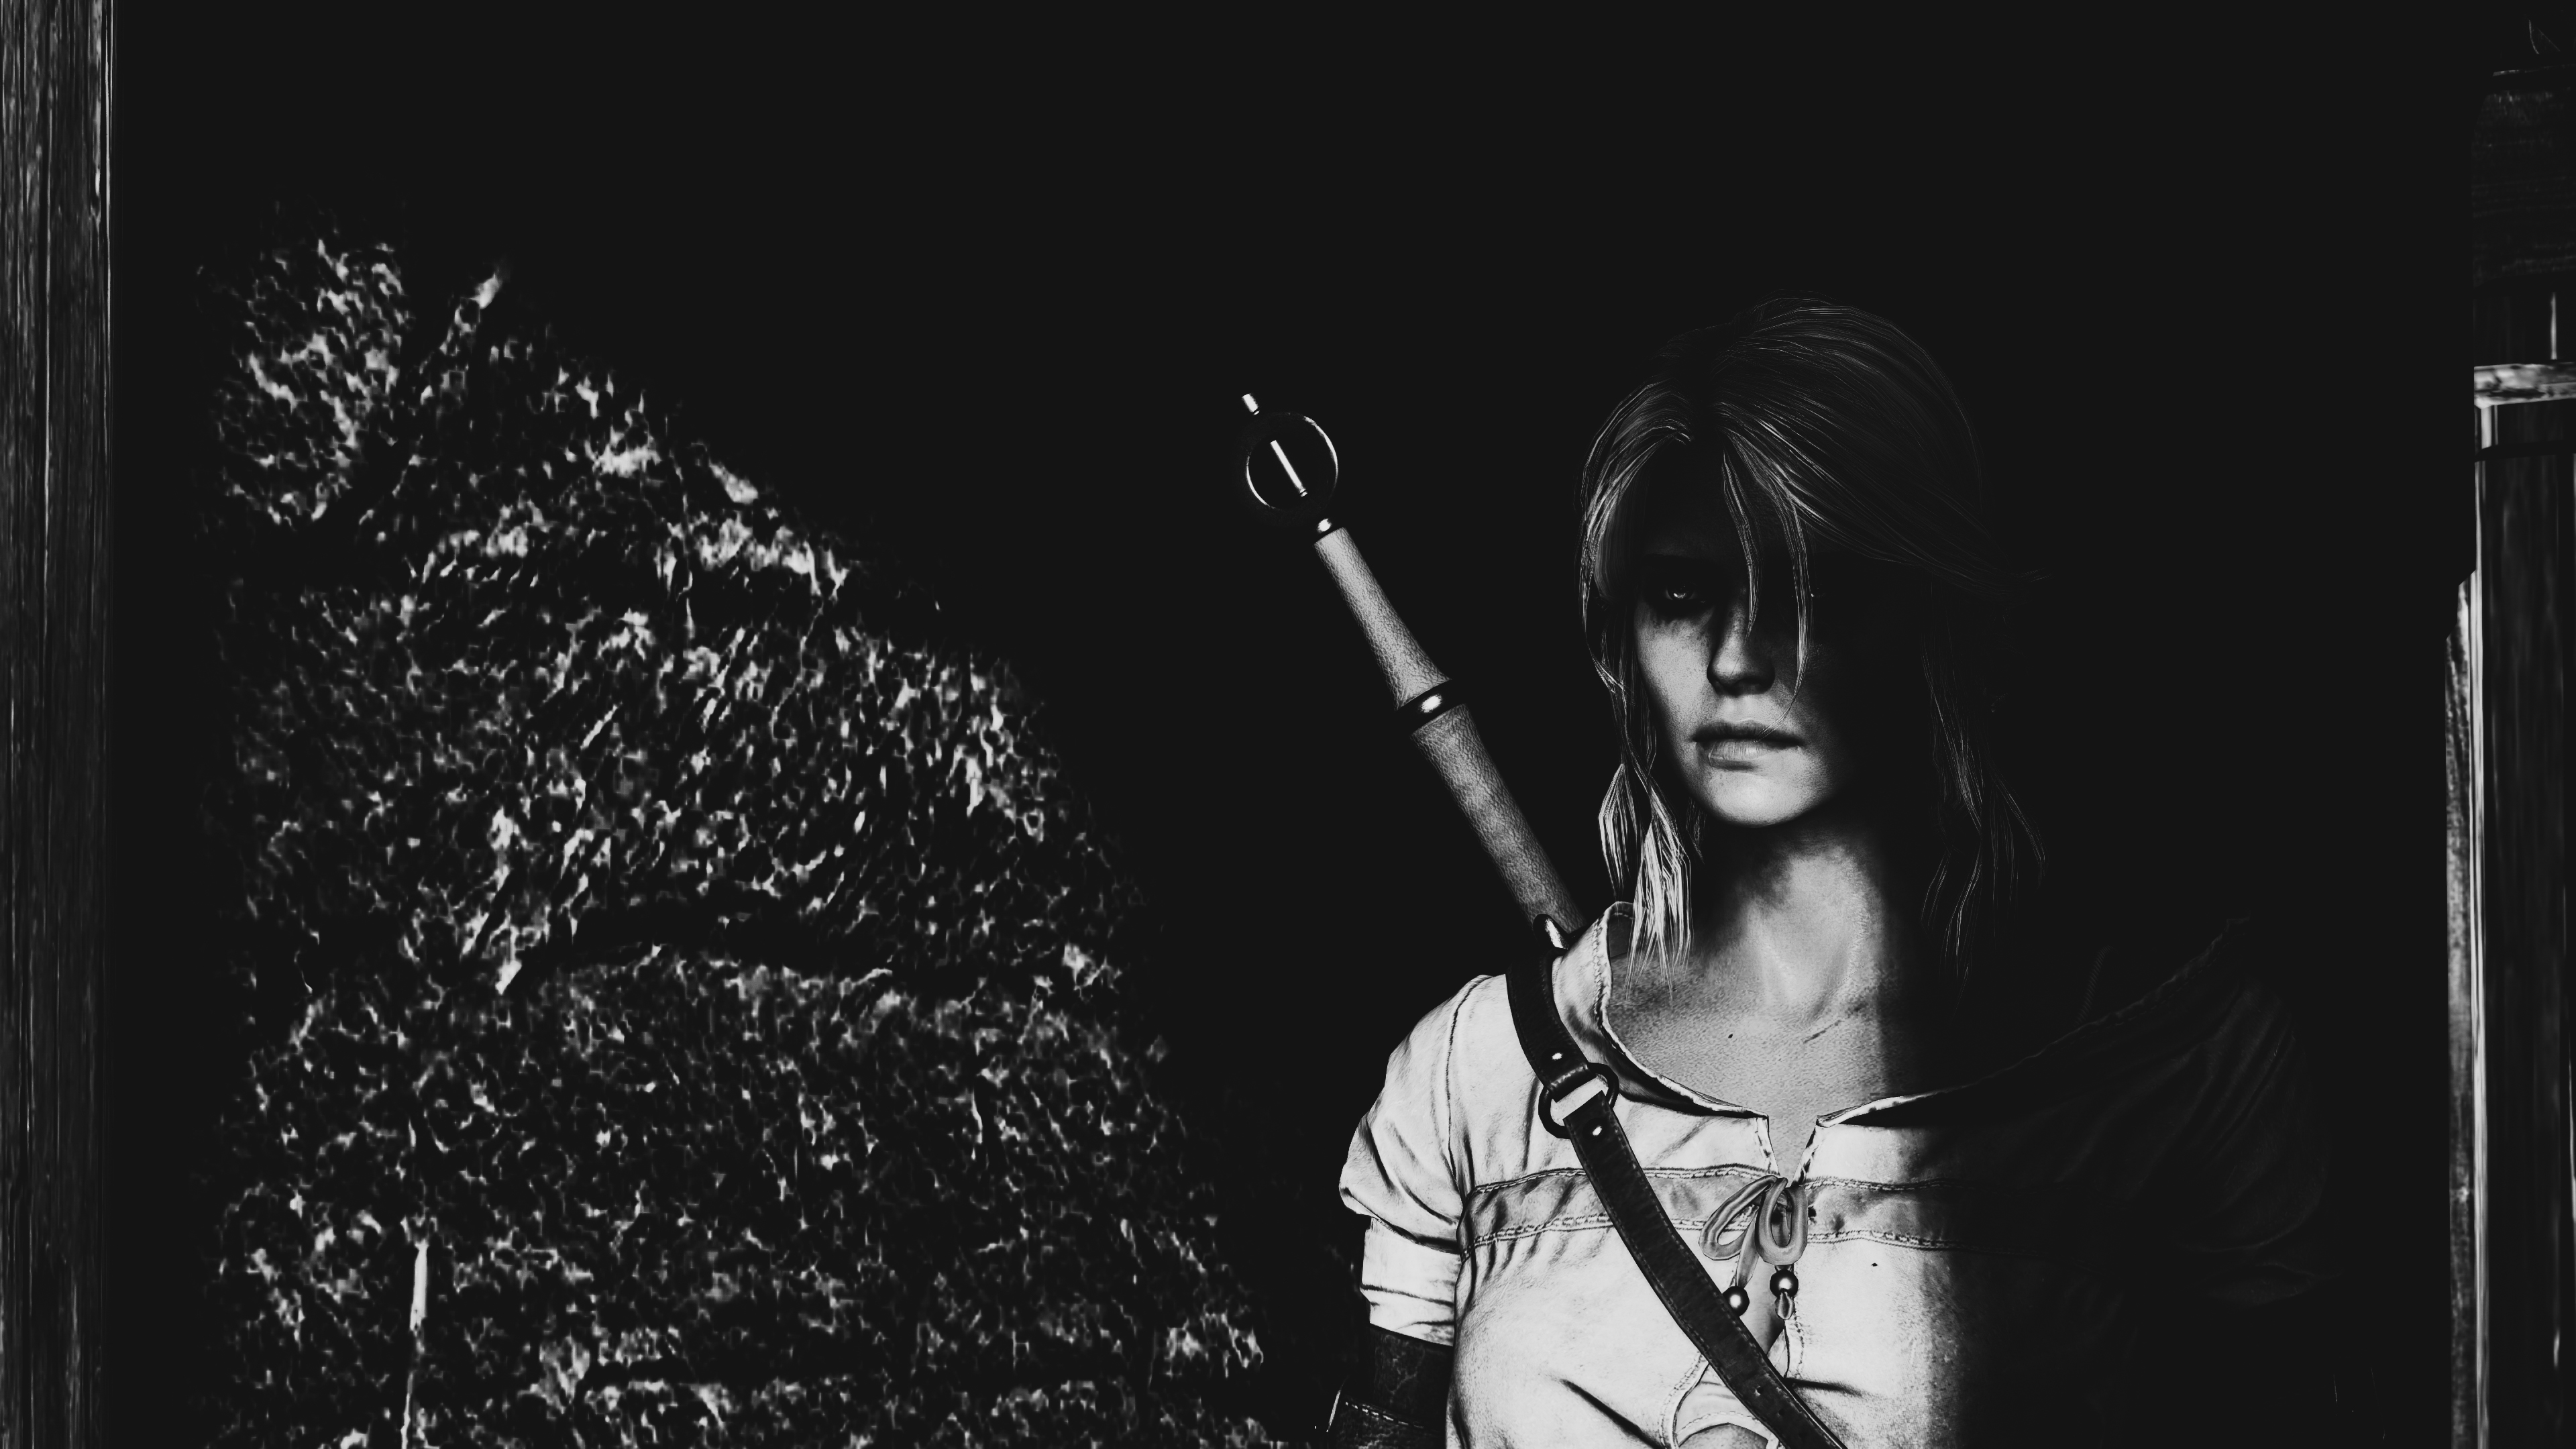 General 3840x2160 The Witcher 3: Wild Hunt The Witcher Cirilla Fiona Elen Riannon fan art monochrome video games video game characters